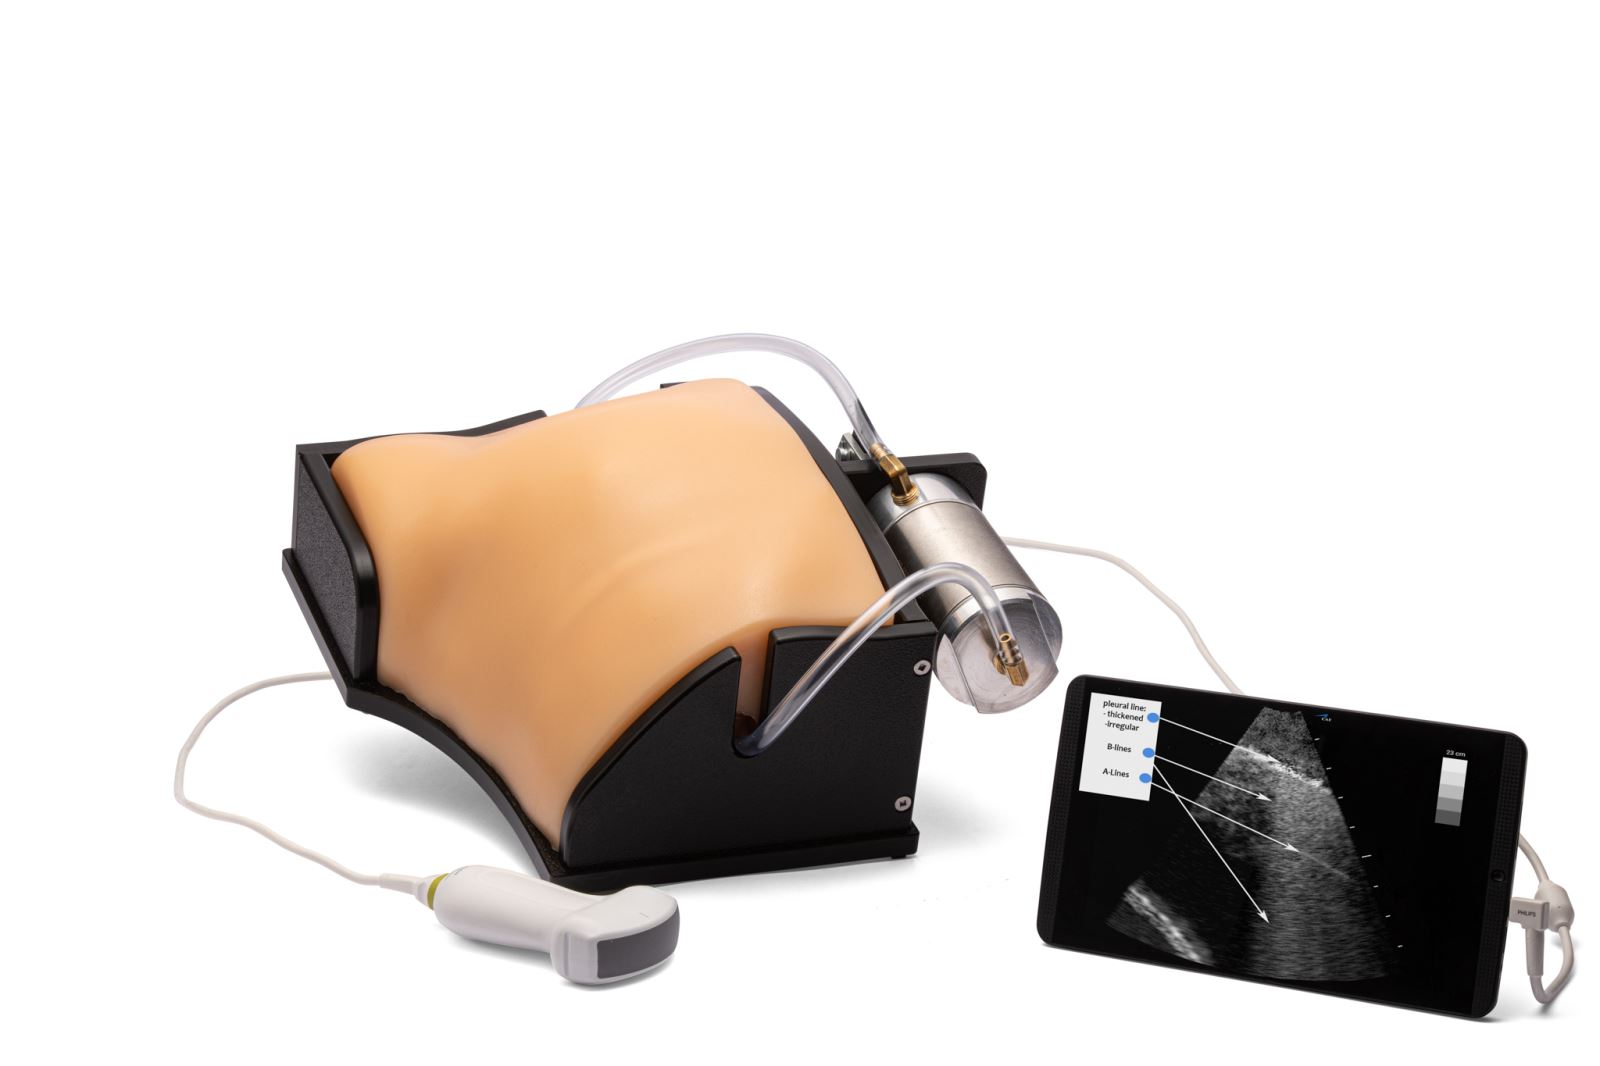 COVID-19 Lung Ultrasound Training Model : BPLUNG-19